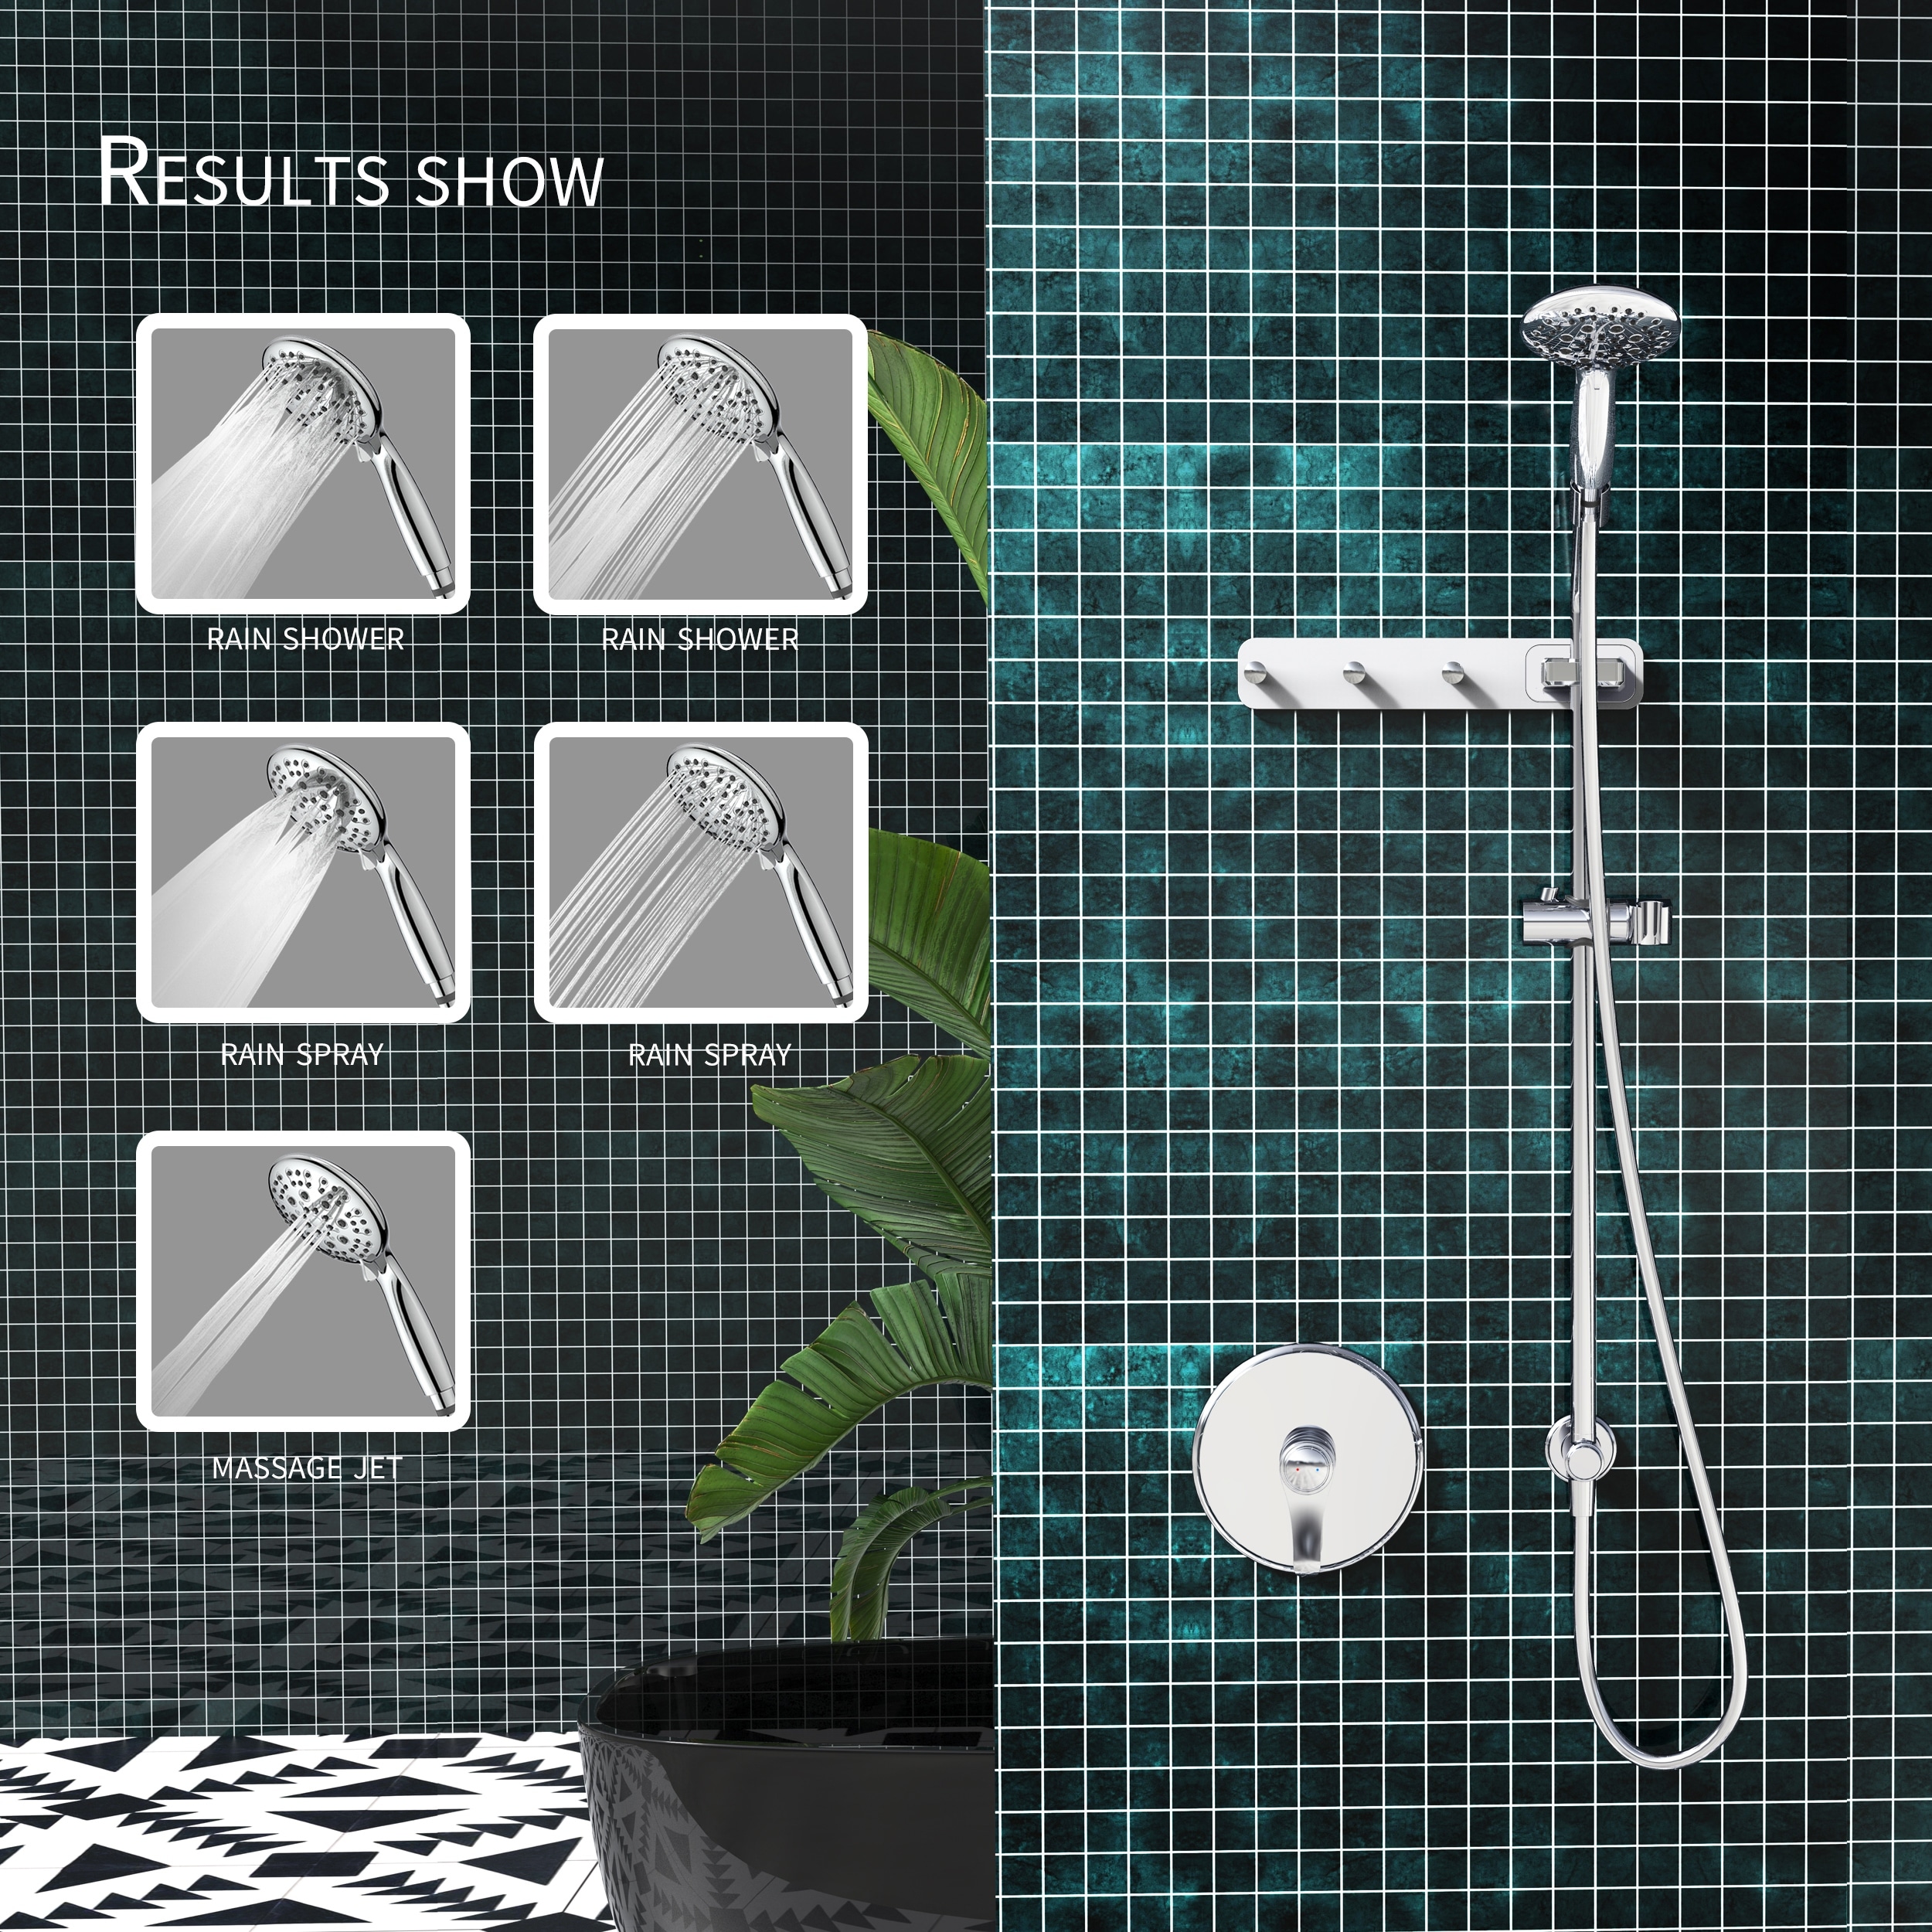 https://ak1.ostkcdn.com/images/products/is/images/direct/799e7ca0357b3beca5359b1c6c6f1ea0829b169f/Multi-Function-Shower-Head---Shower-System-with-4%22-Rain-Showerhead-And-Storage-Hook%2C-Simple-Style%2C-Brushed-Nickel.jpg